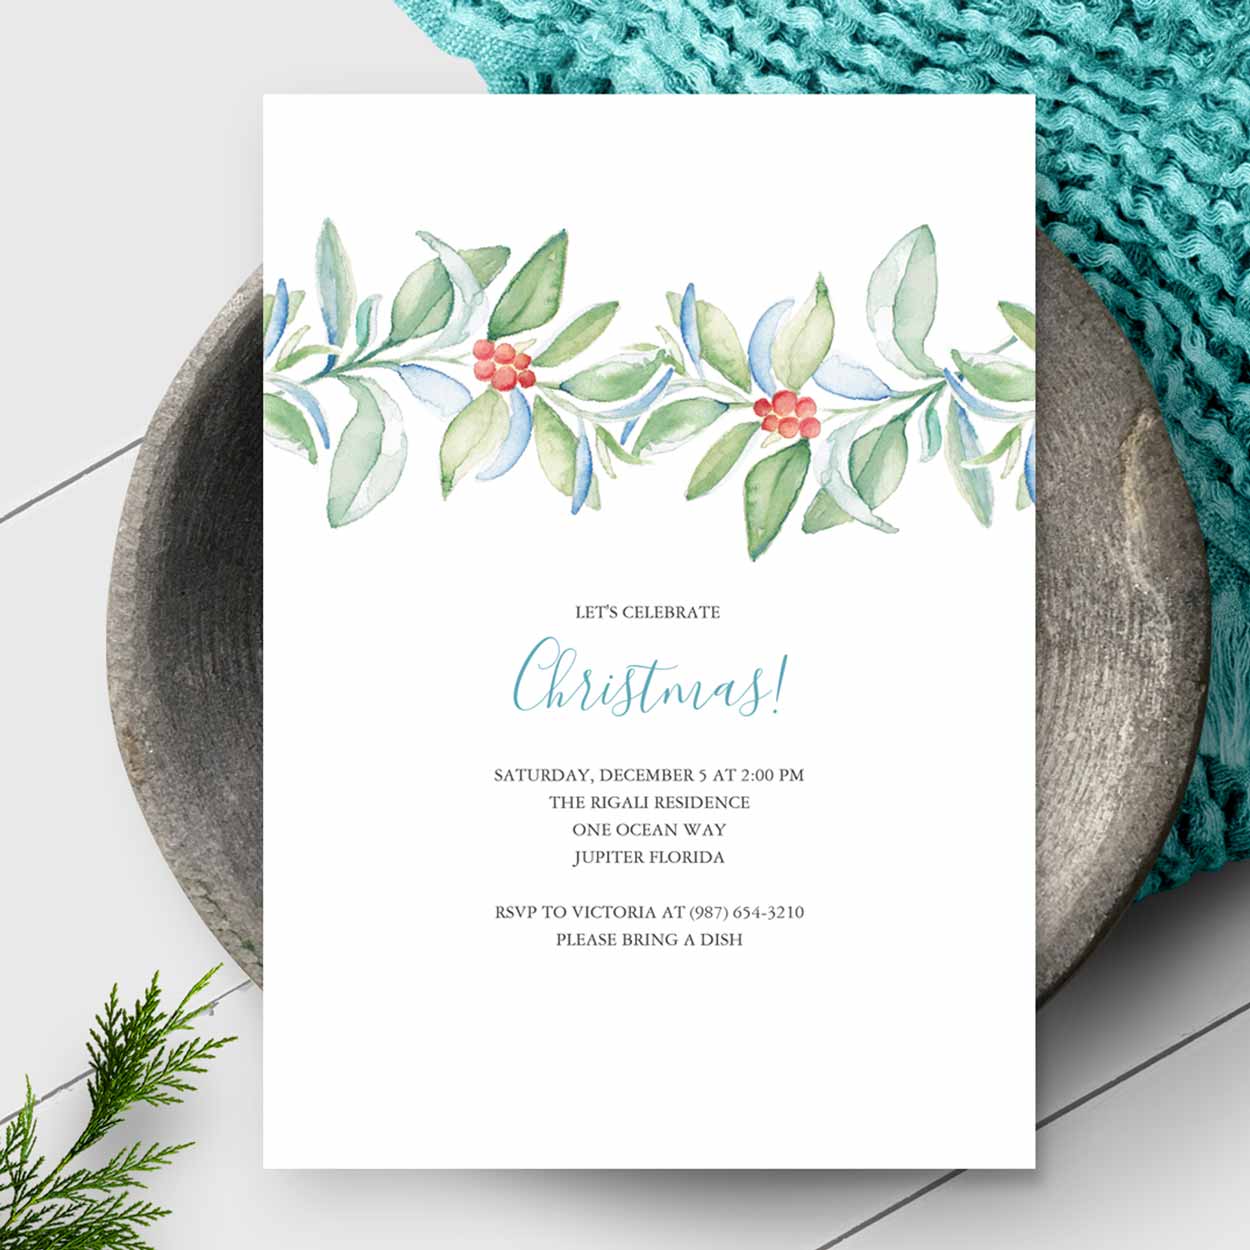 Christmas party invitations featuring unique watercolor art by Victoria Grigaliunas of Do Tell A Belle. Click to shop